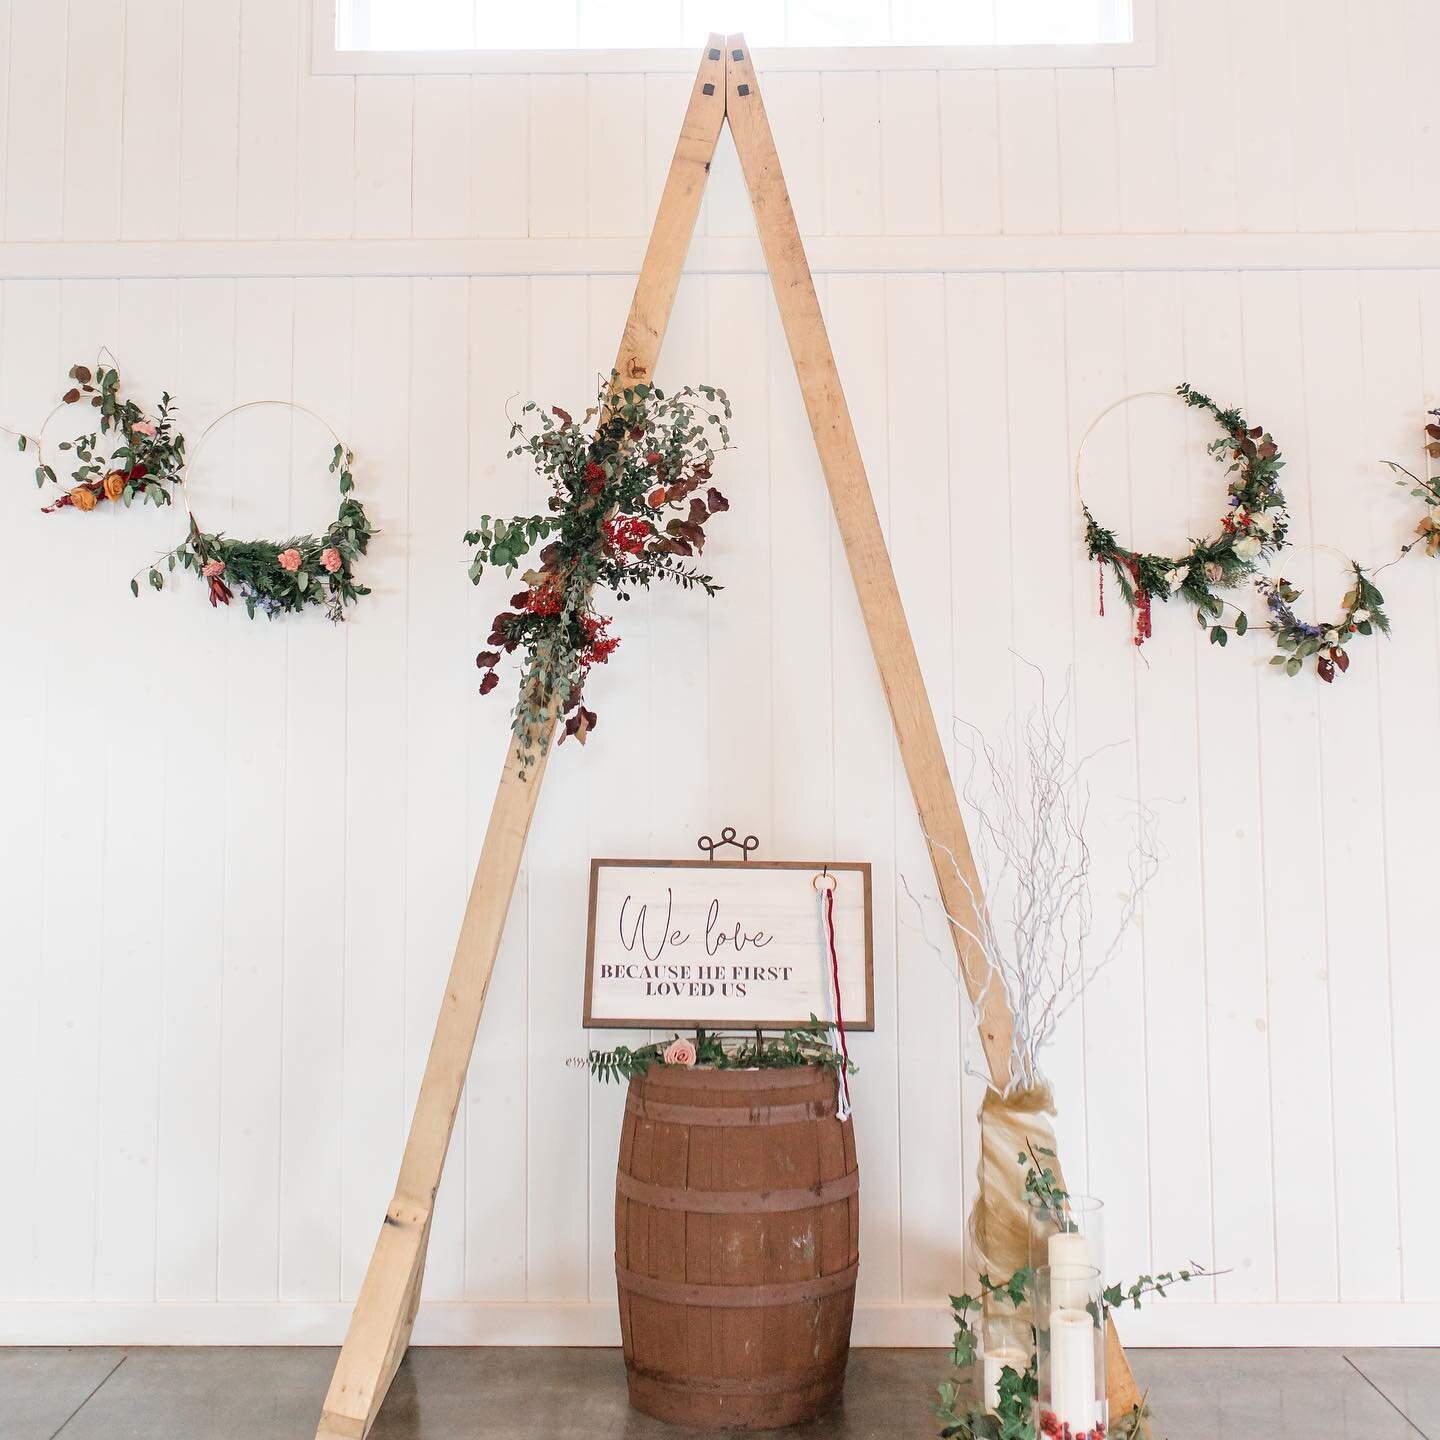 One of my favorite parts of the wedding industry is the 3 months of relative calm in the winter. In this case, absence really does make the heart grow fonder, and the hiatus always makes me so excited to jump back into wedding season. It&rsquo;s also